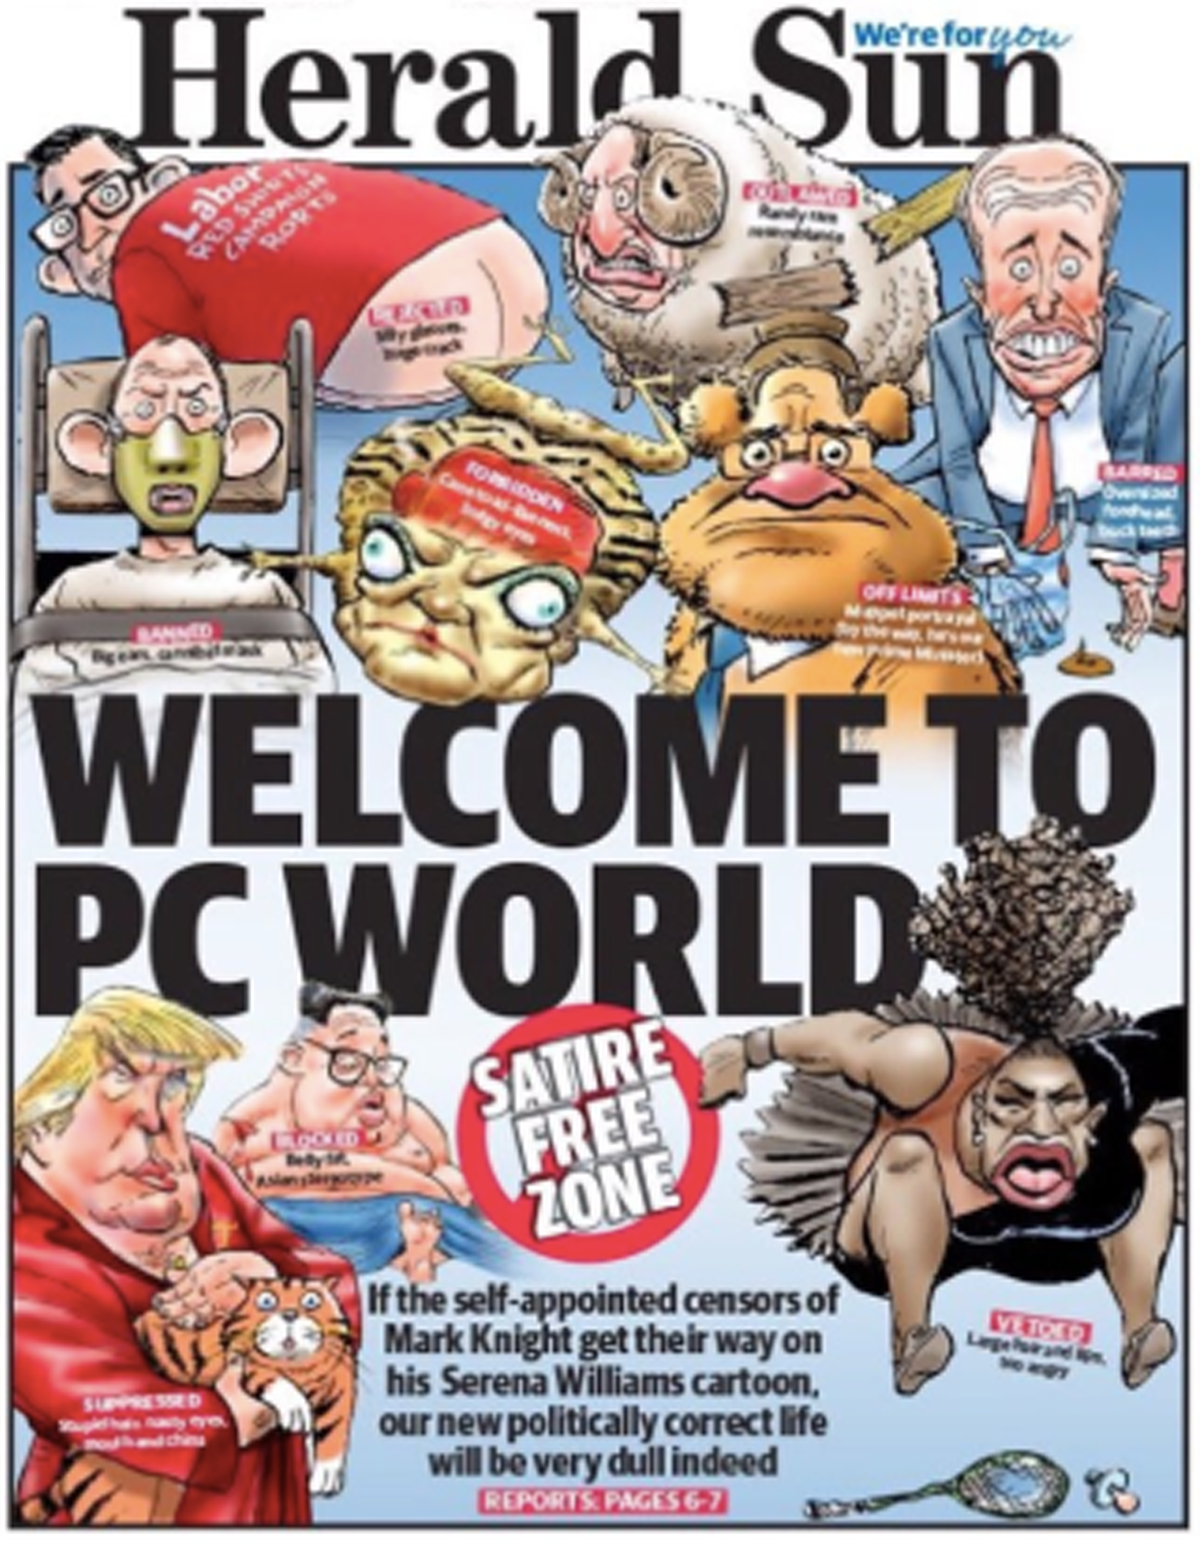 Serena Williams cartoon front page of the herald sun